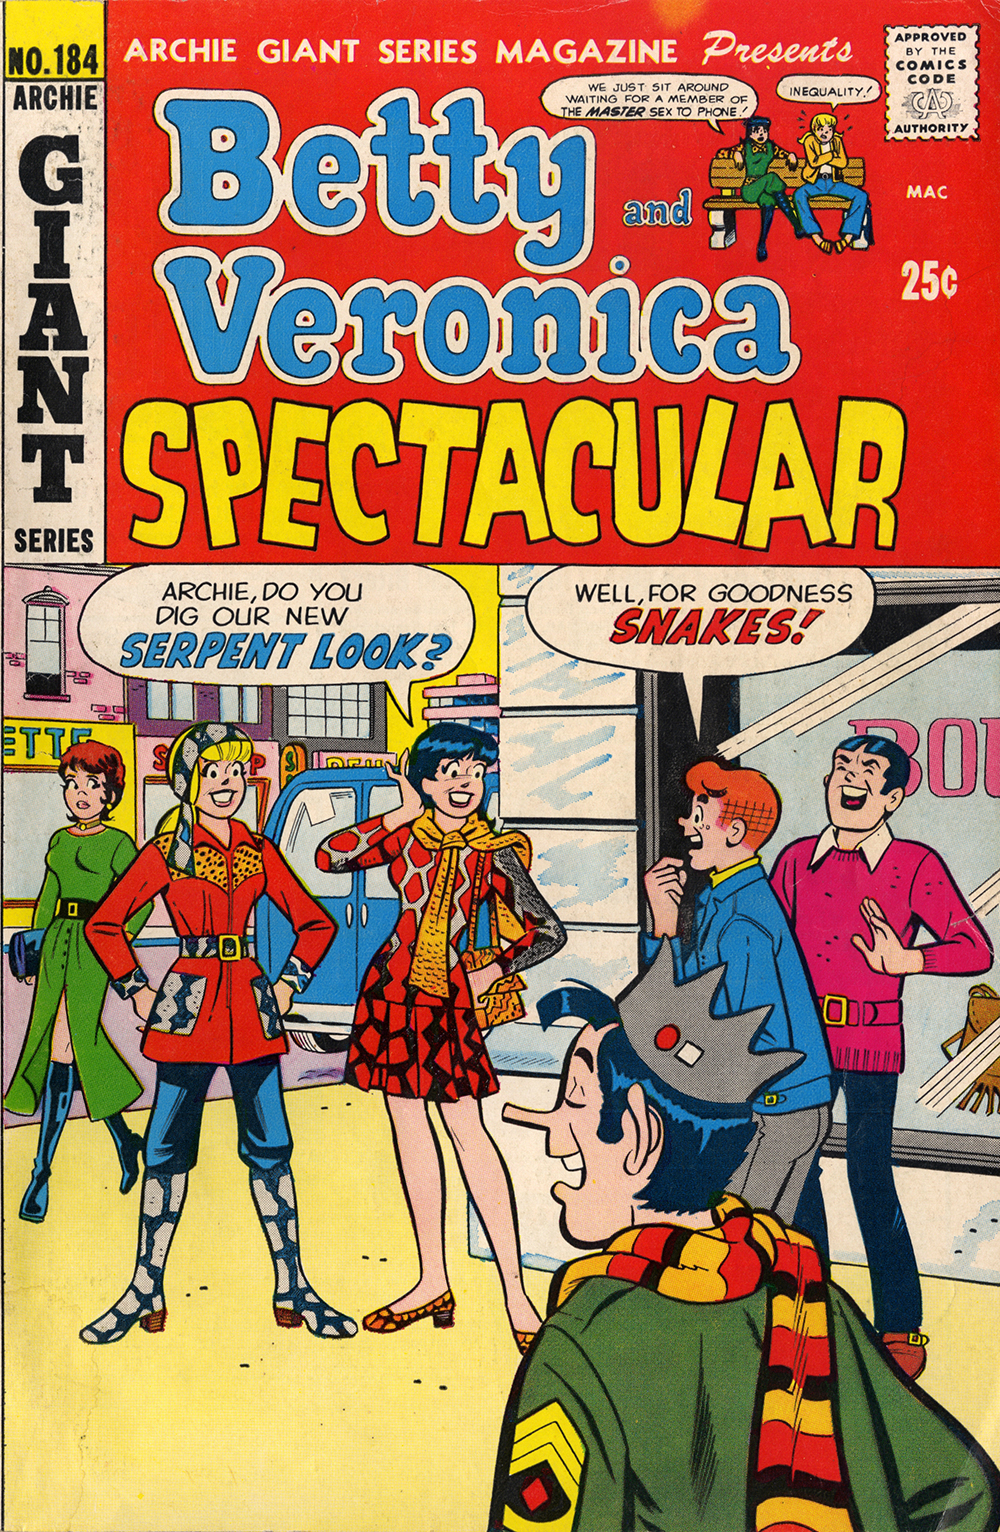 Read online Archie Giant Series Magazine comic -  Issue #184 - 1